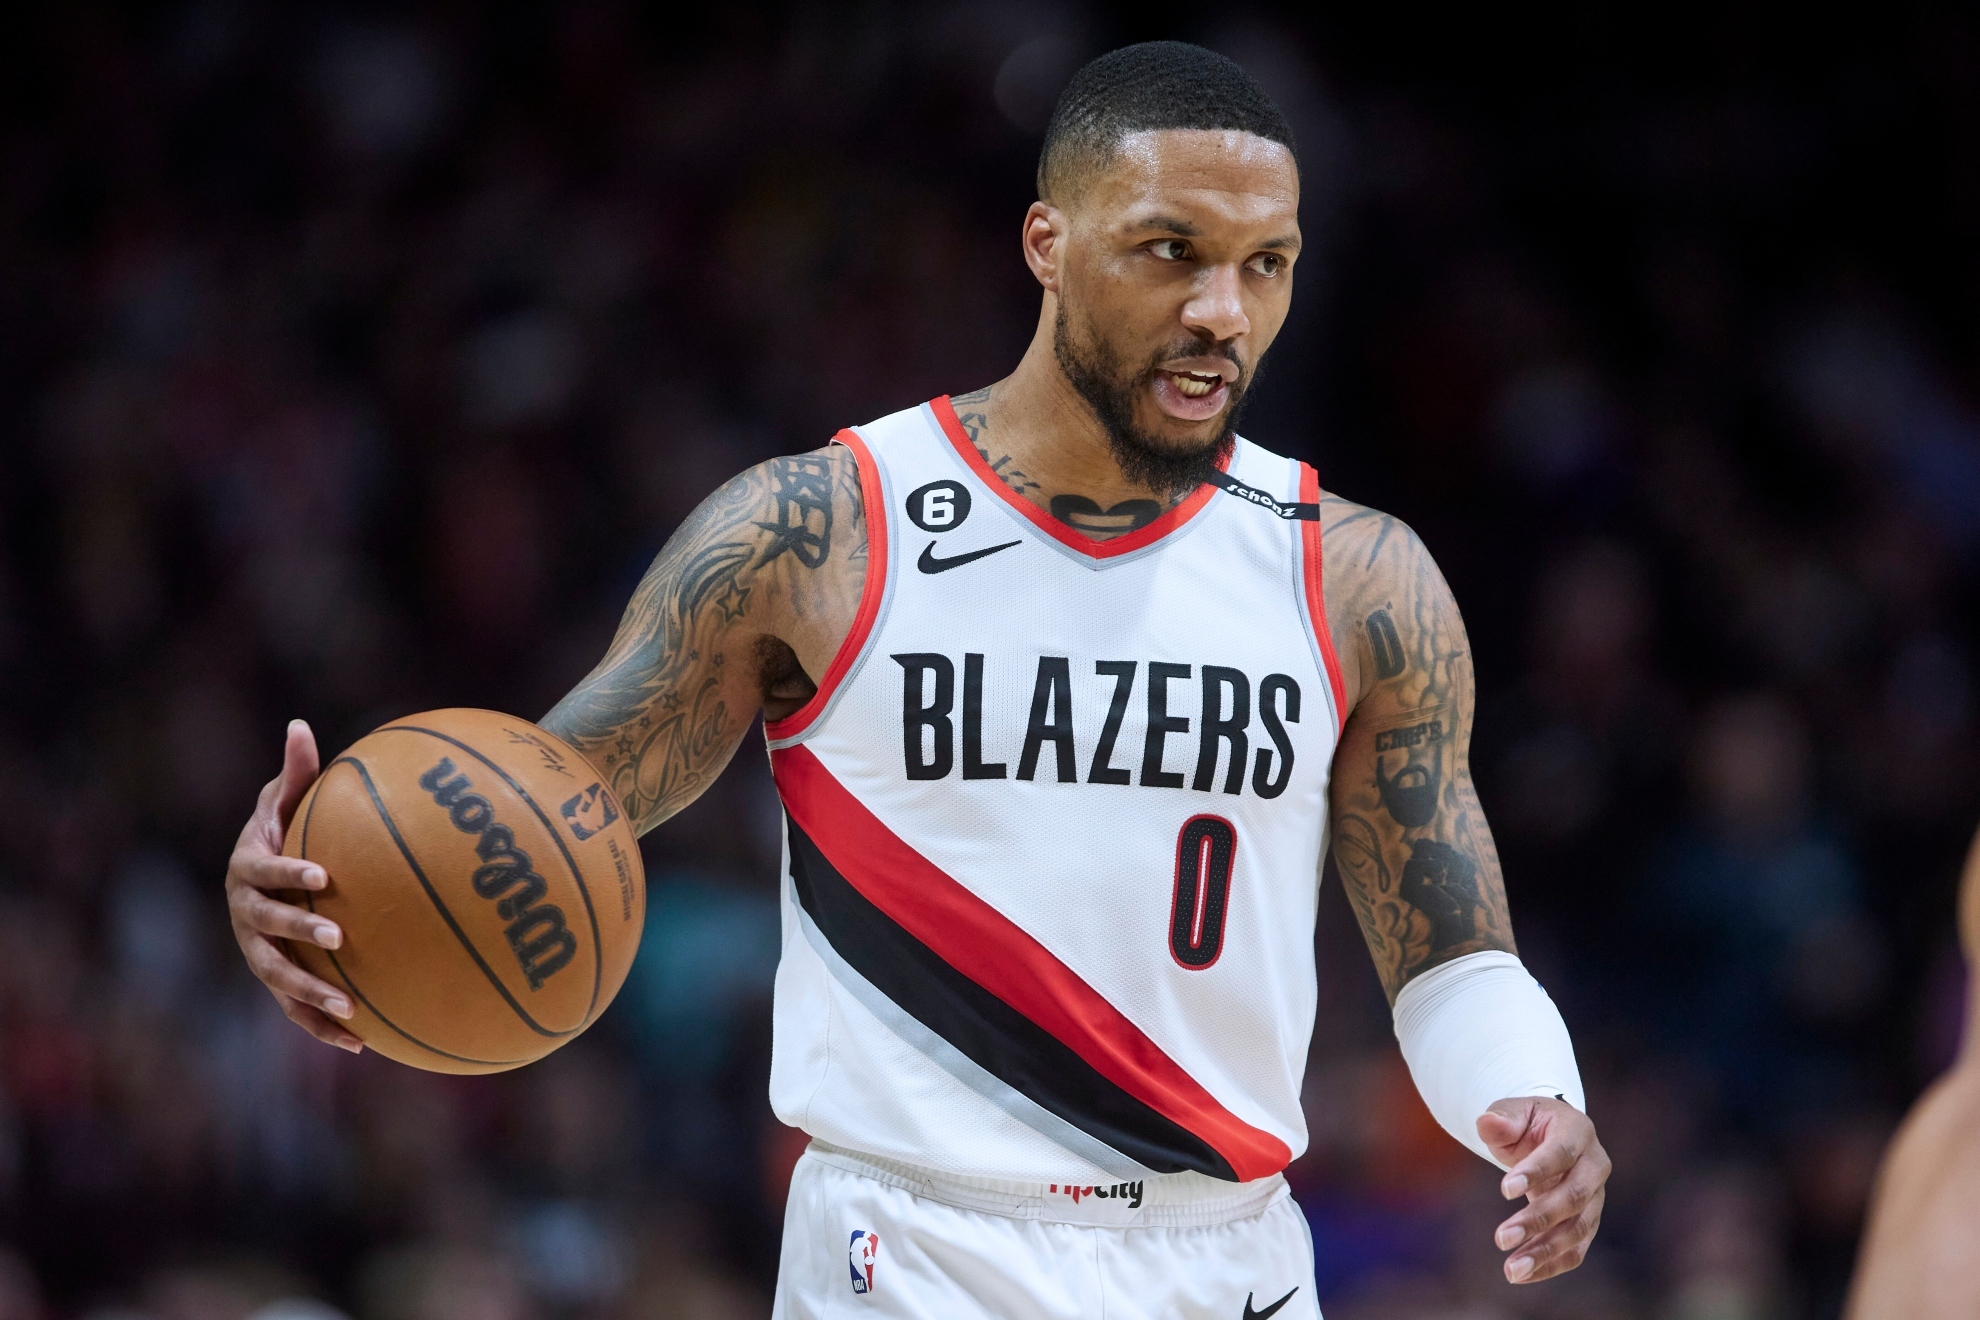 All-Star guard determined to remain in Portland, calls for strategic moves